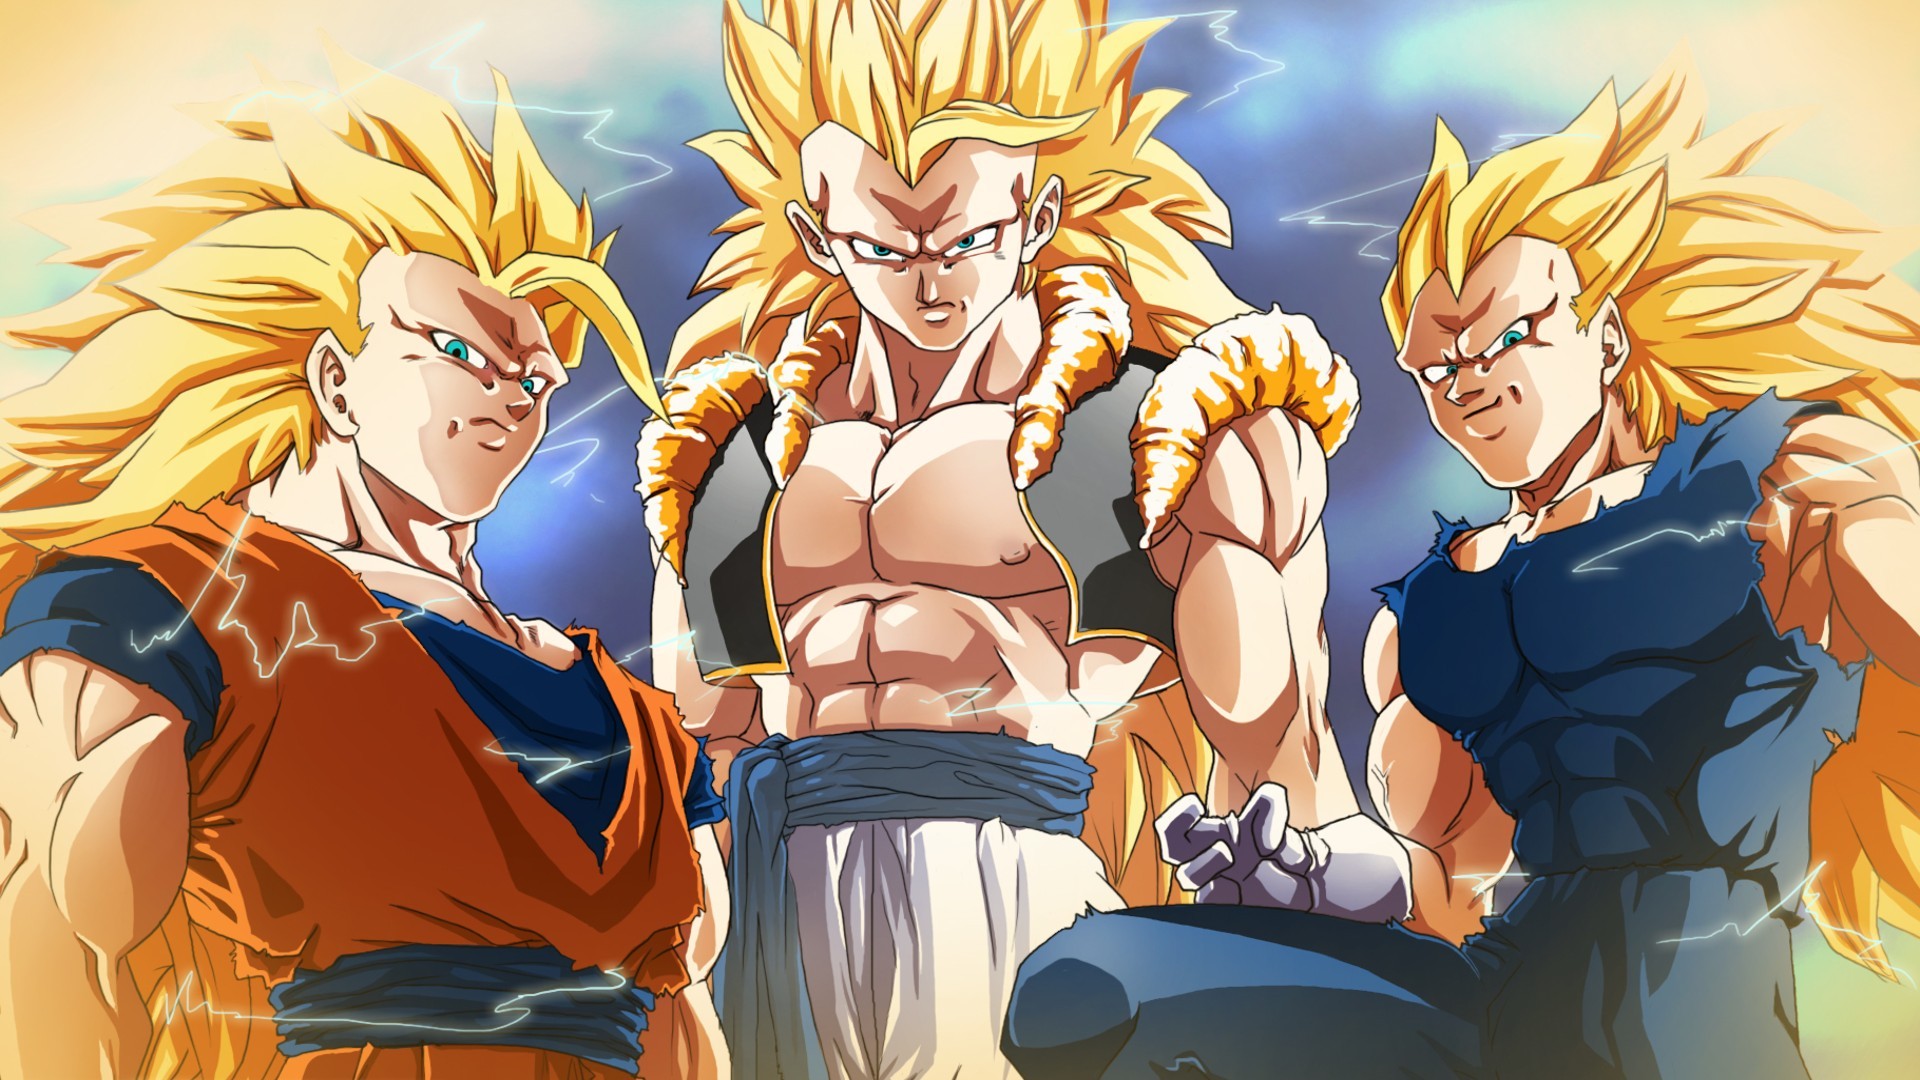 Wallpaper Goku SSJ3 with resolution 1920X1080 pixel. You can use this wallpaper as background for your desktop Computer Screensavers, Android or iPhone smartphones